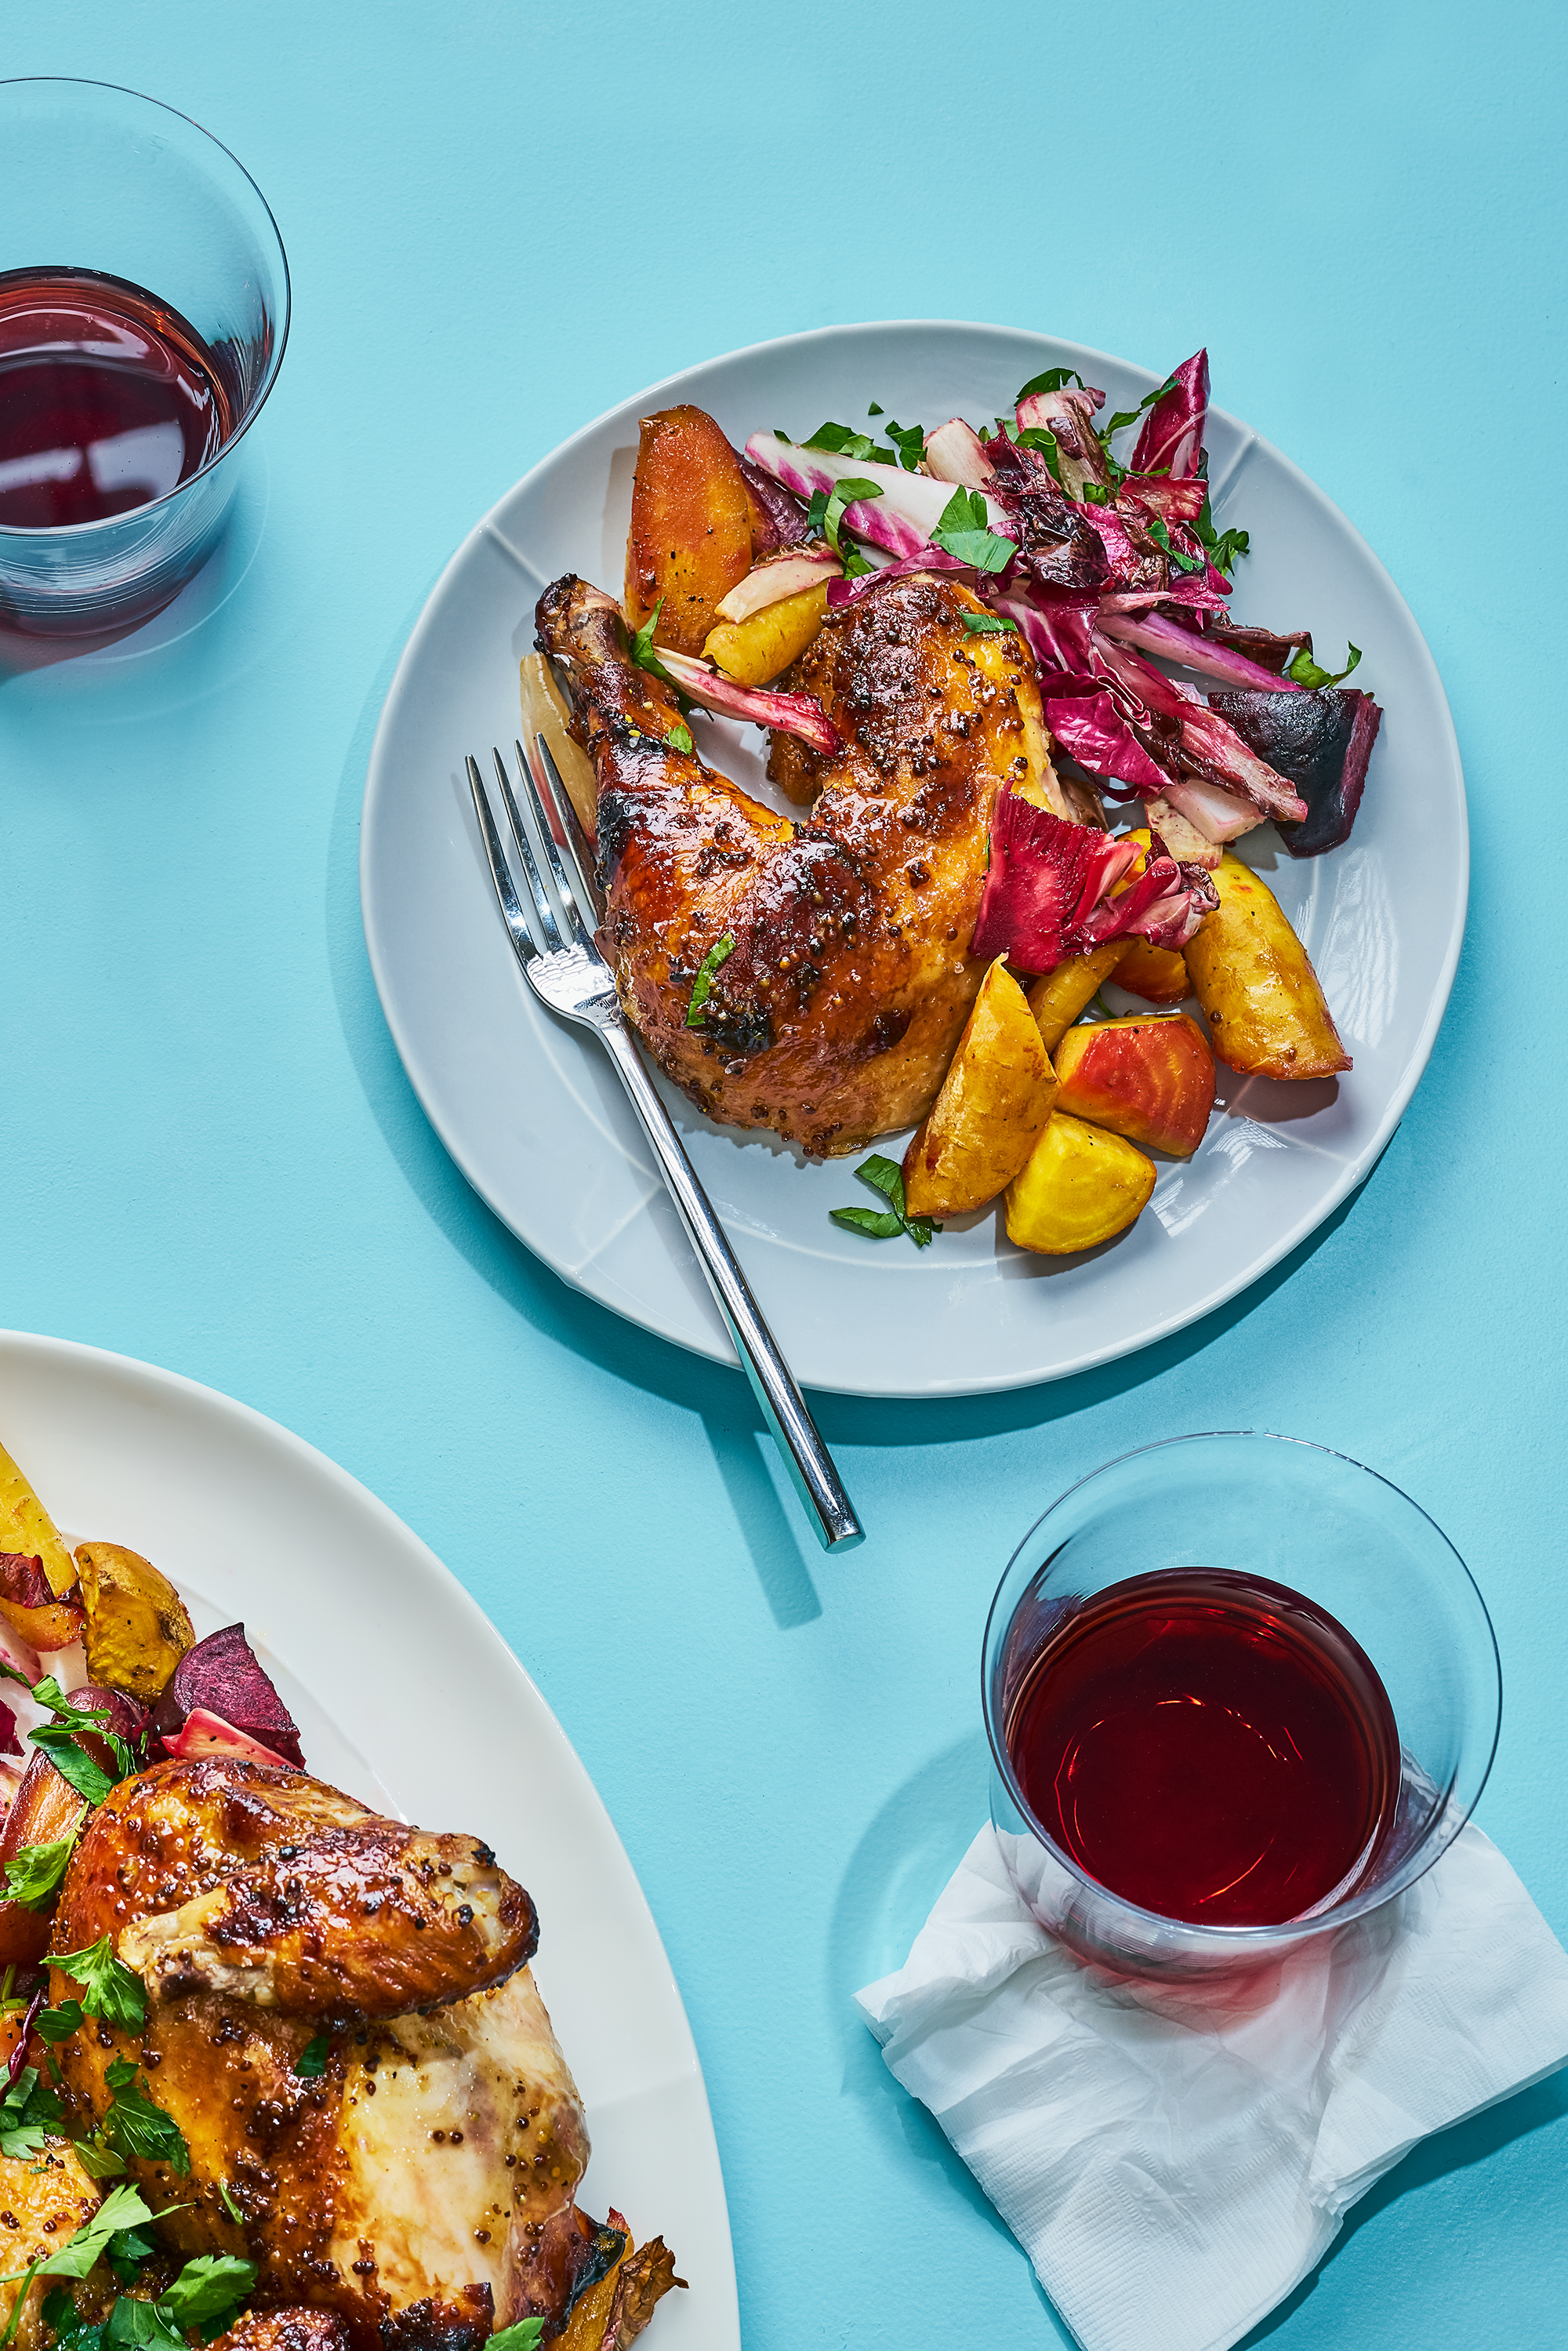 Hot Mustard Glazed Chicken and a Red Wine Pairing